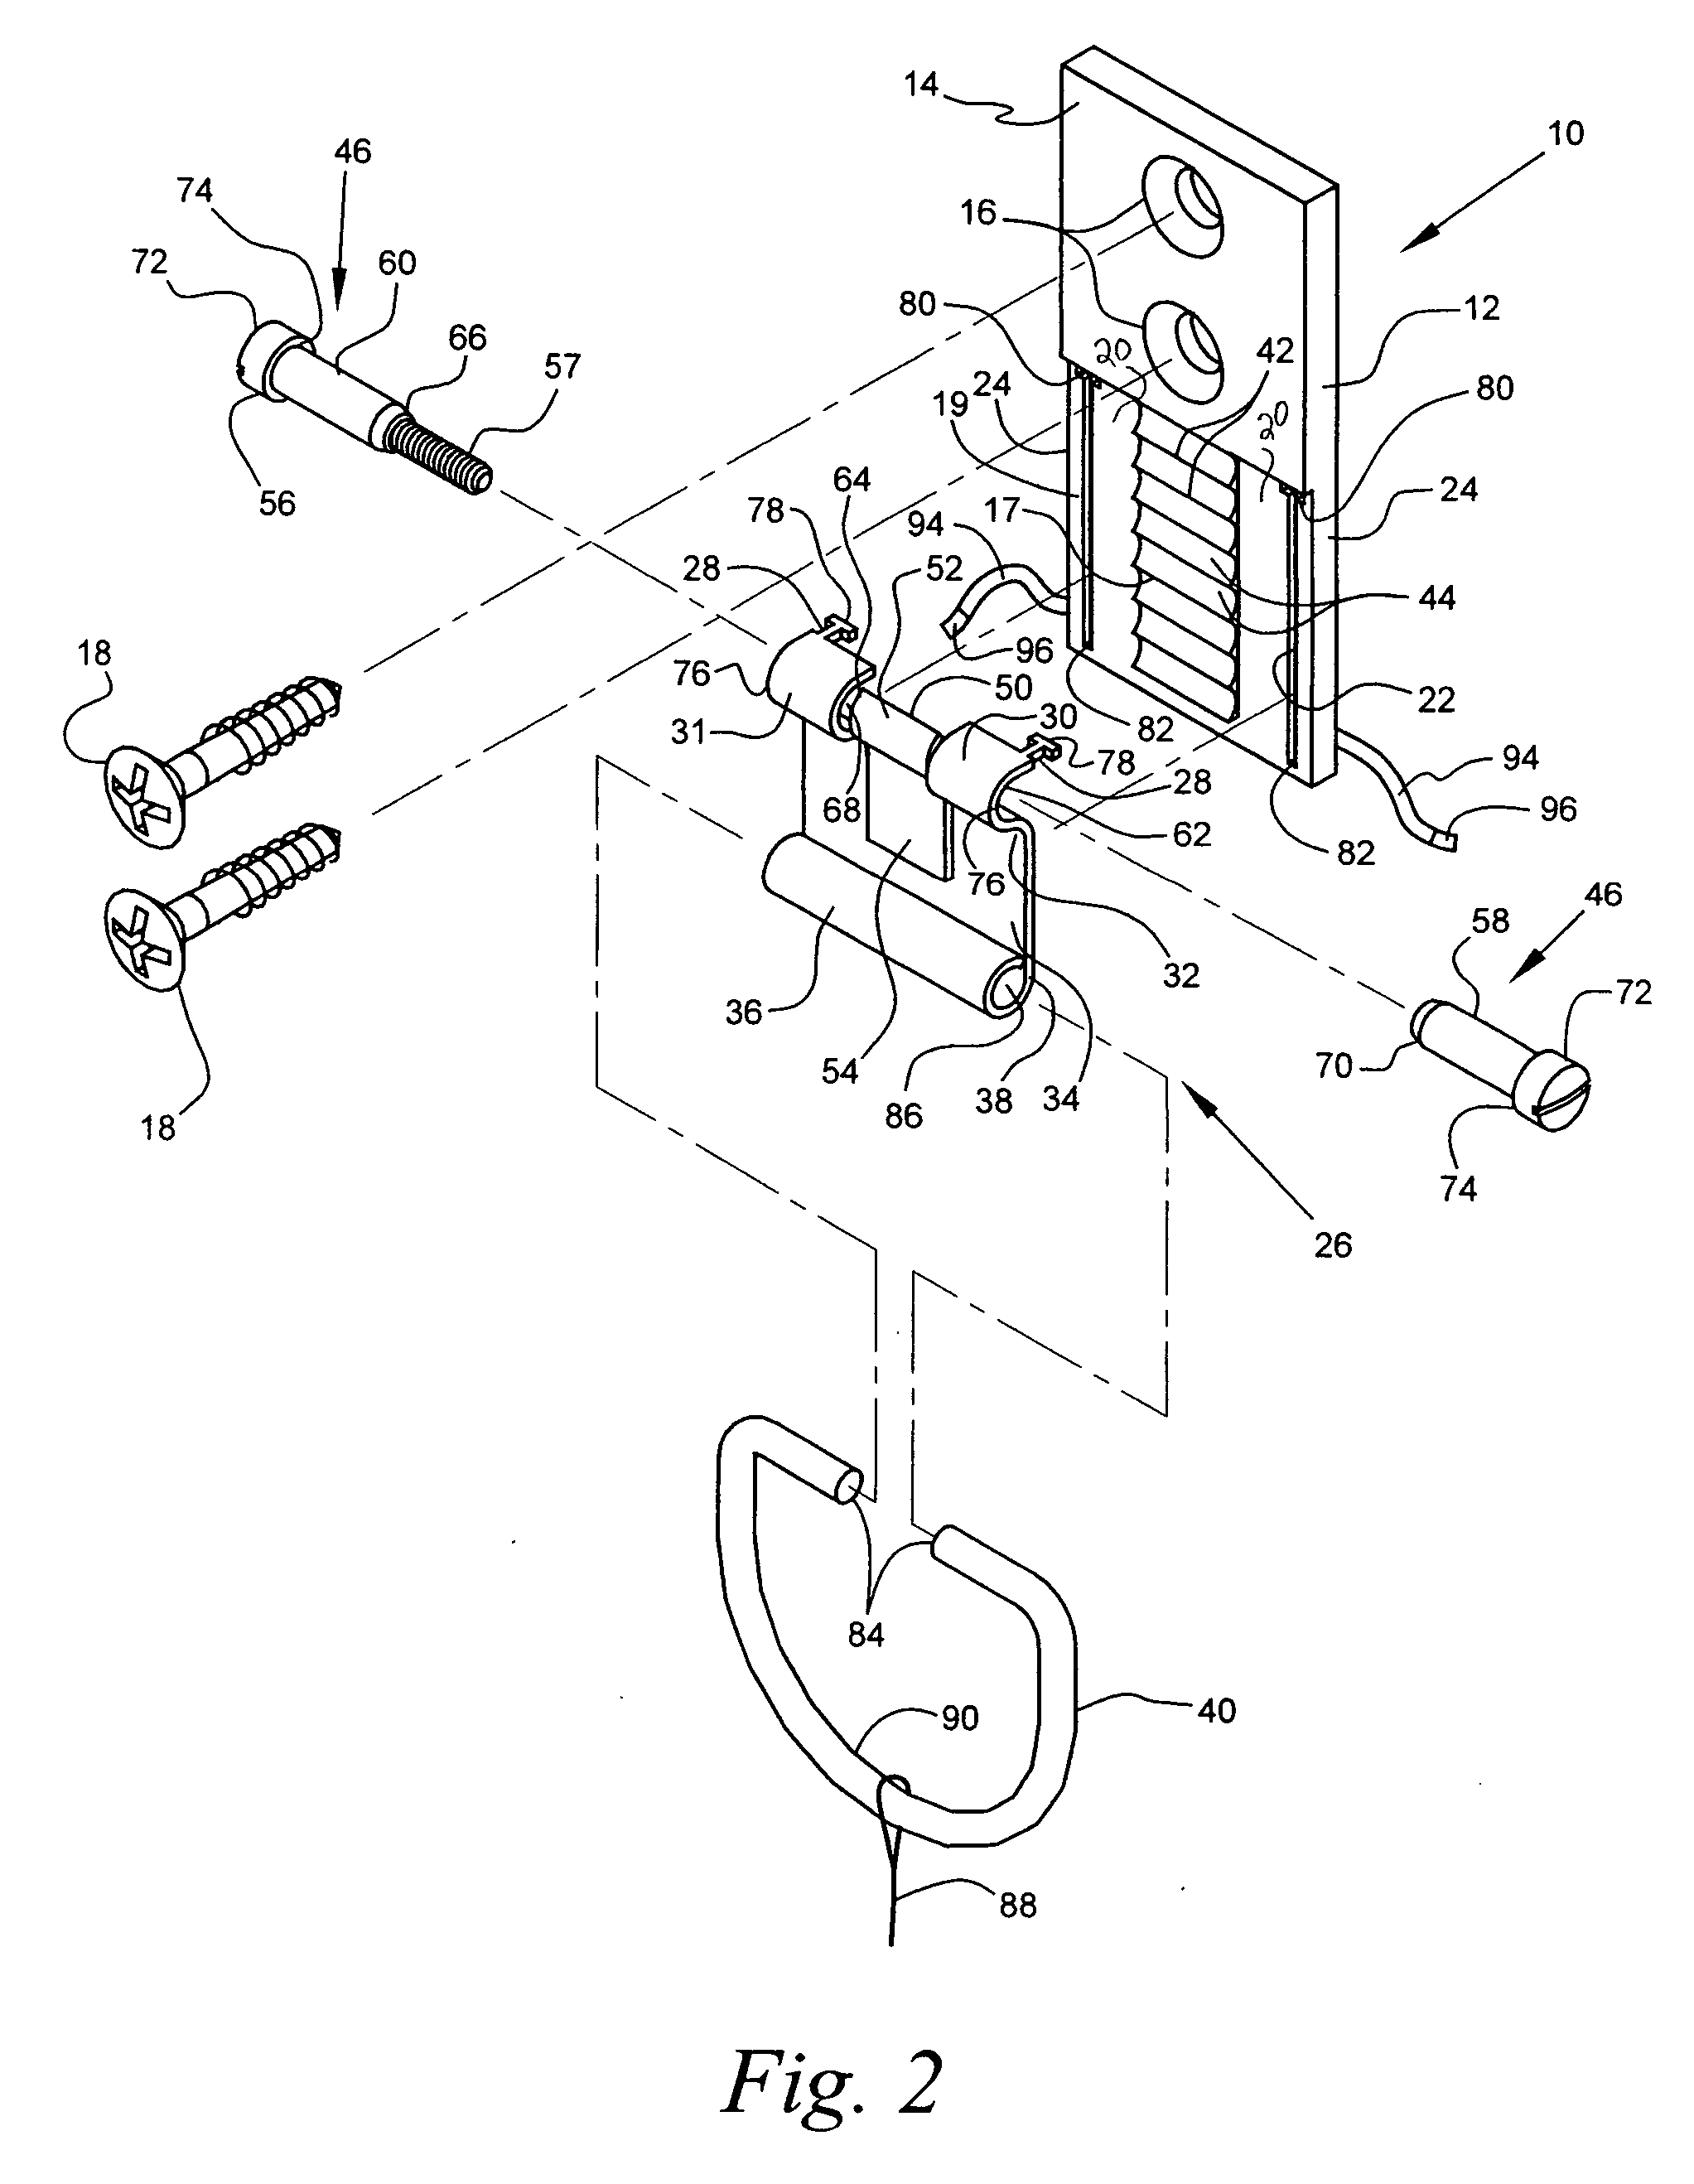 Device for supporting and vertically adjusting the position of an object upon a support structure